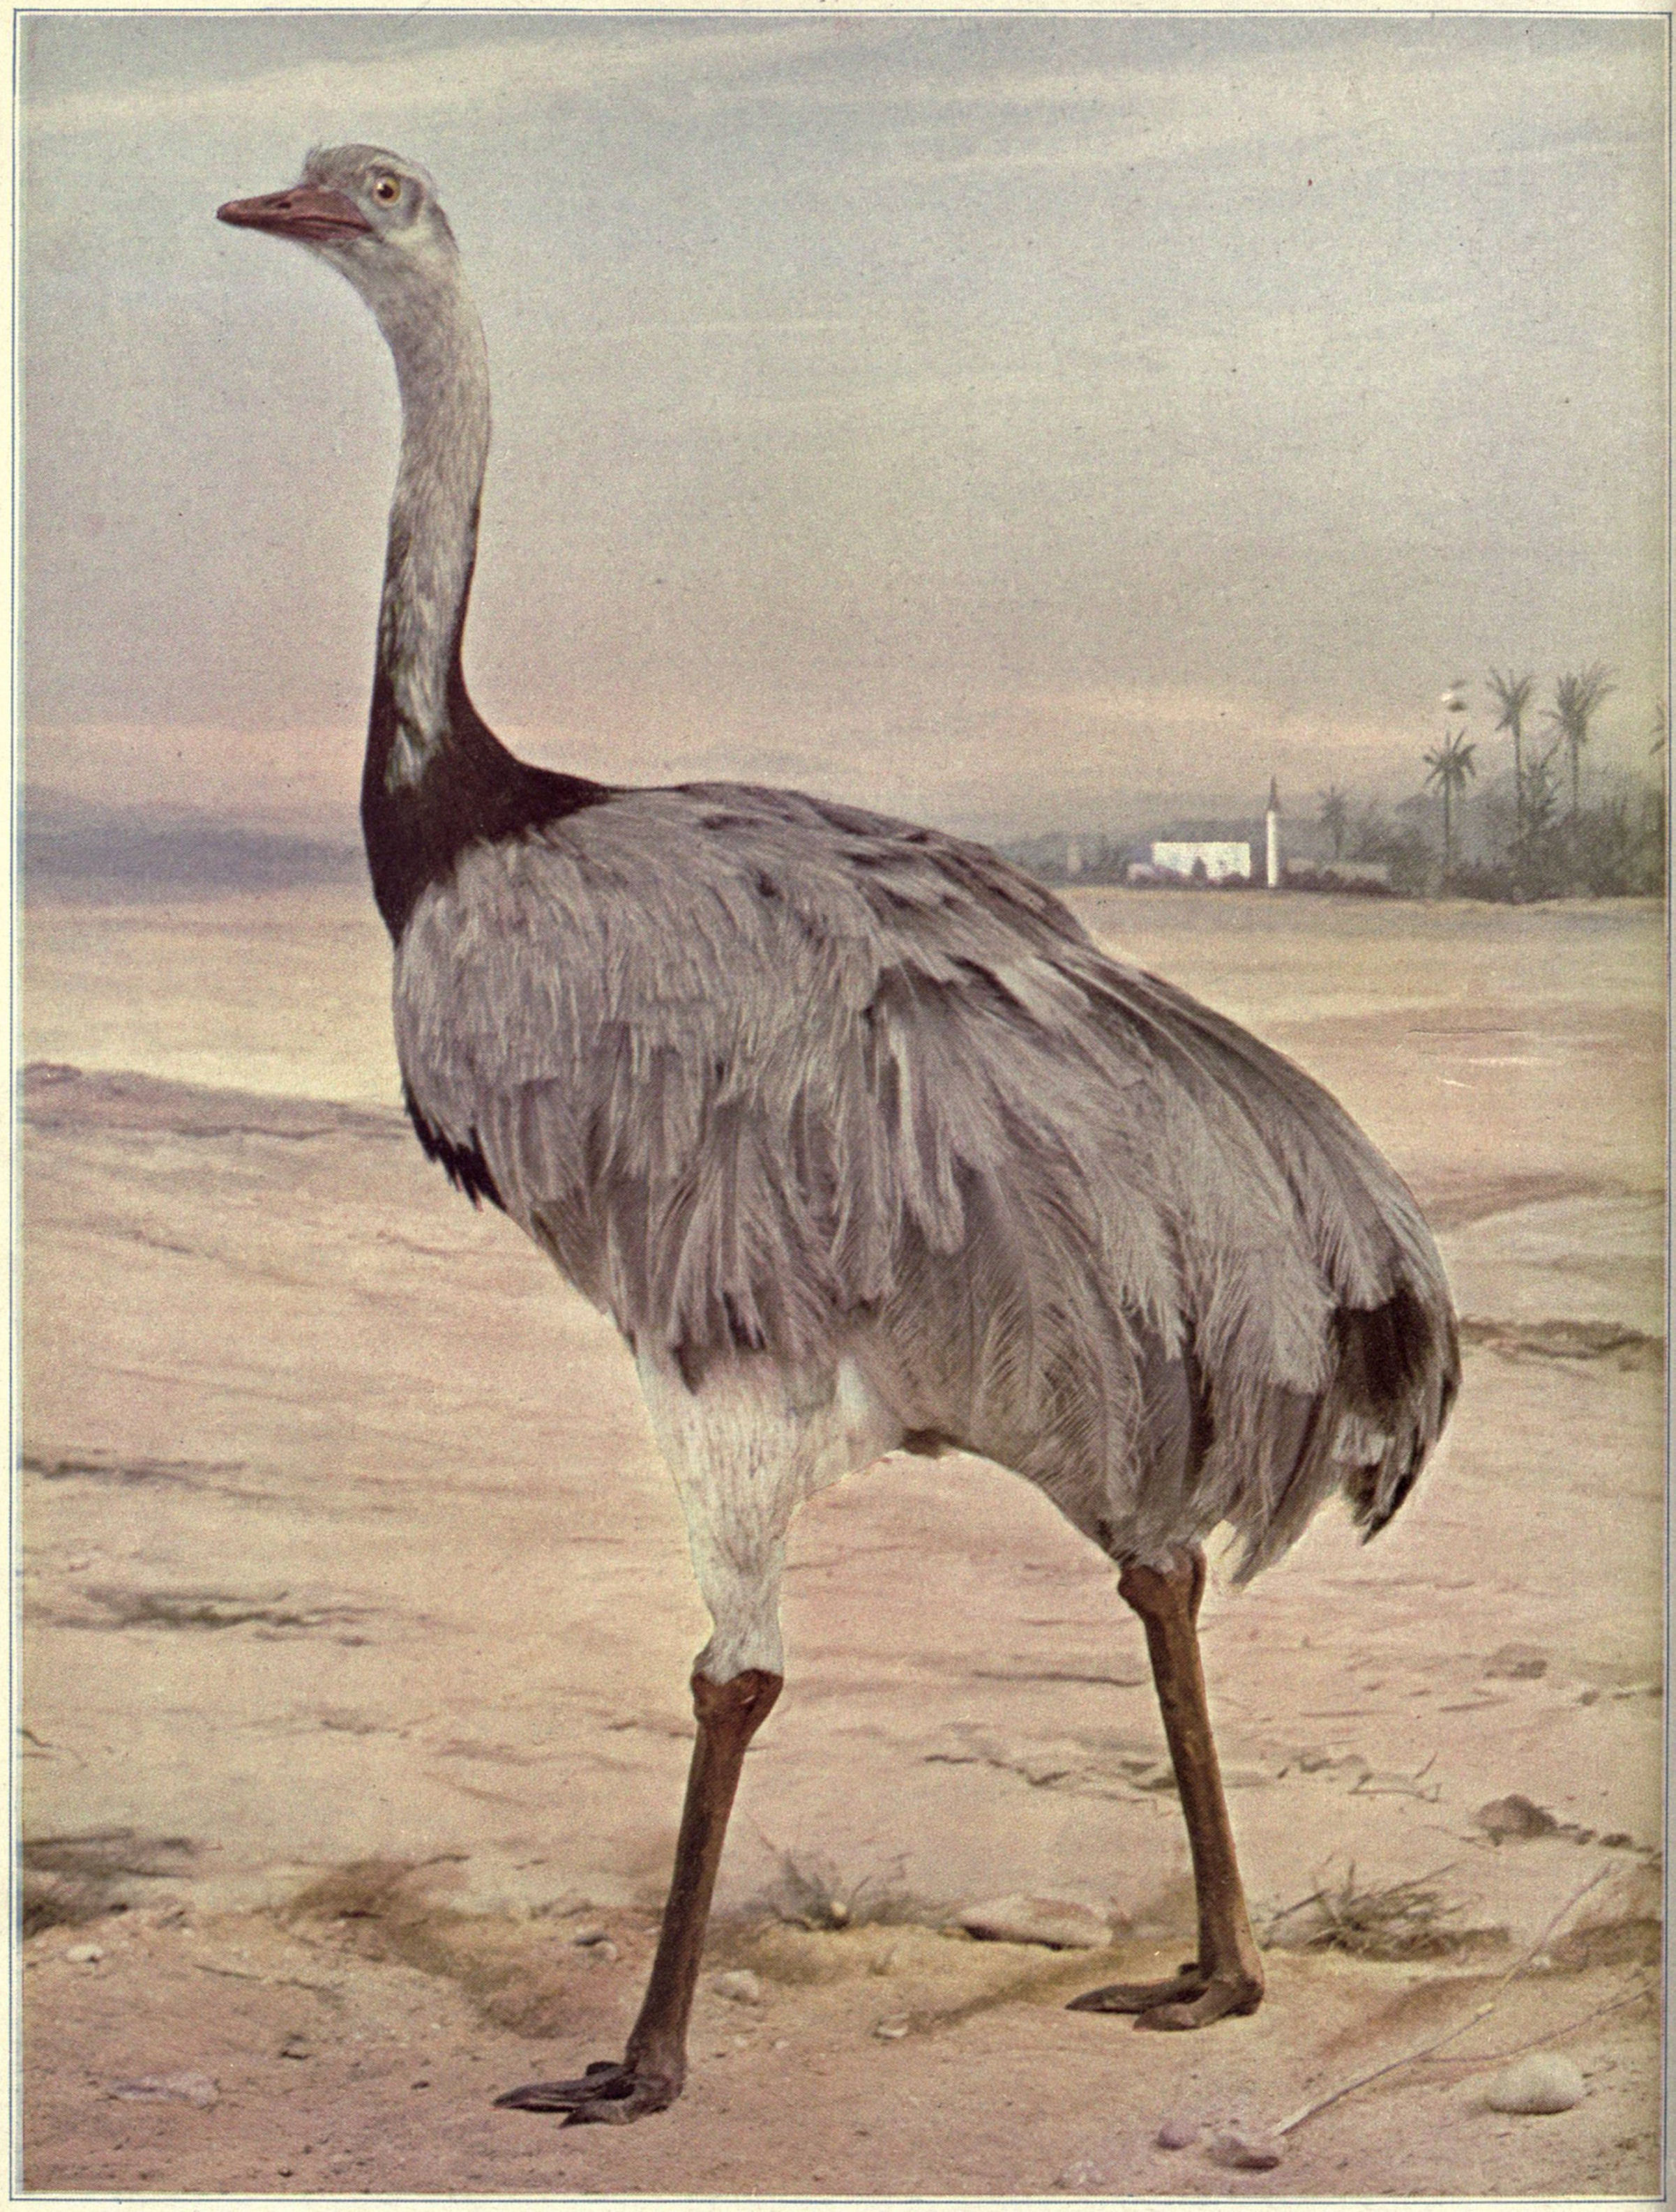 Birds Illustrated by Color Photography, Vol. 3, No. 5